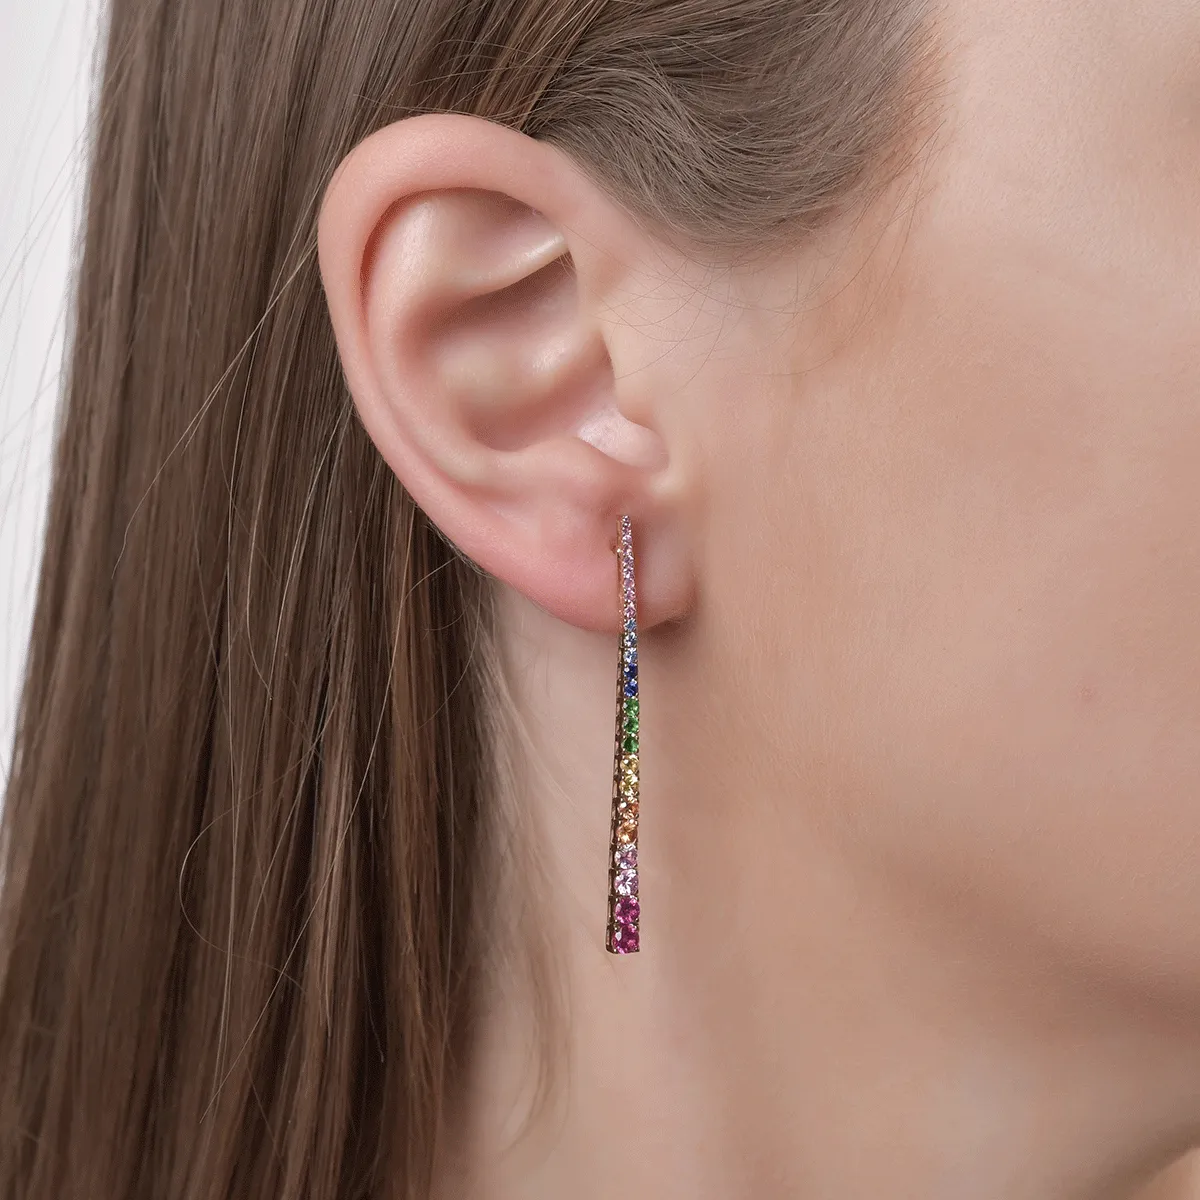 18K white gold earrings with 1.64ct multicoloured sapphires